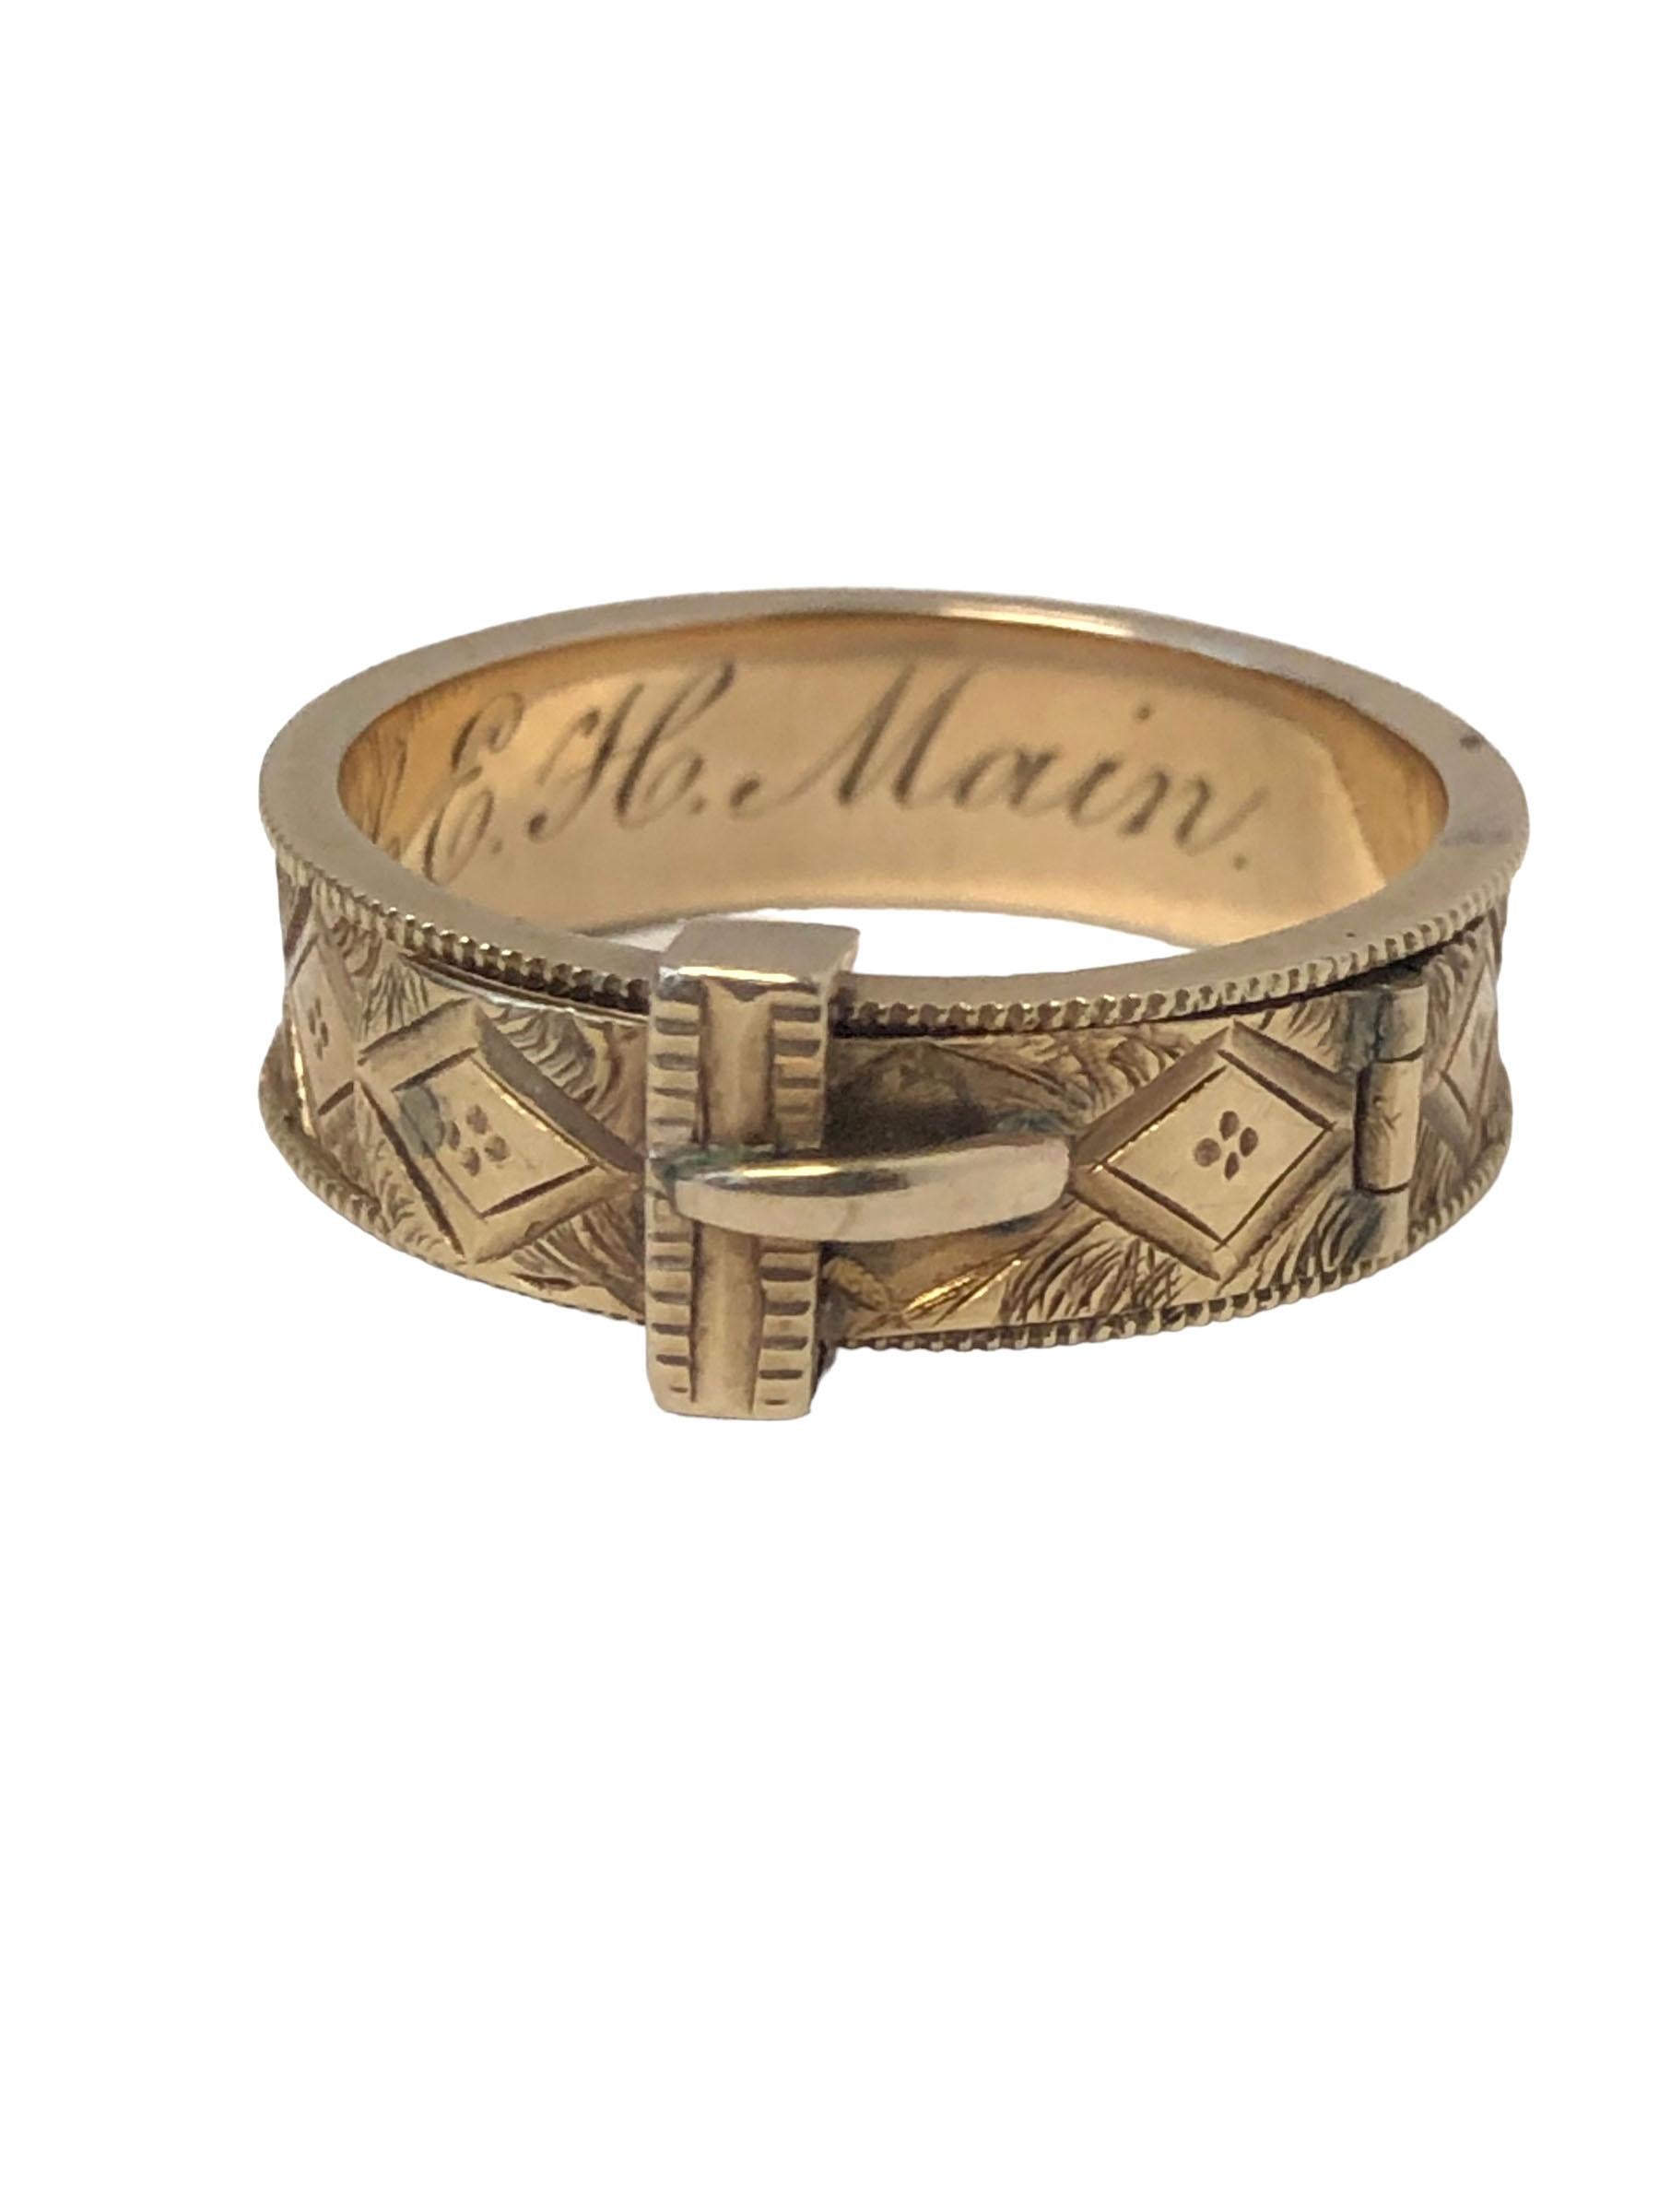 Circa 1850 - 1870 14k Yellow Gold Buckle Form Mourning Ring, measuring 1/4 inch wide and is a 6 3/4 finger size, incredible near mint condition considering the age with hand engraving / chasing workmanship, the Buckle on the top is hinged and when